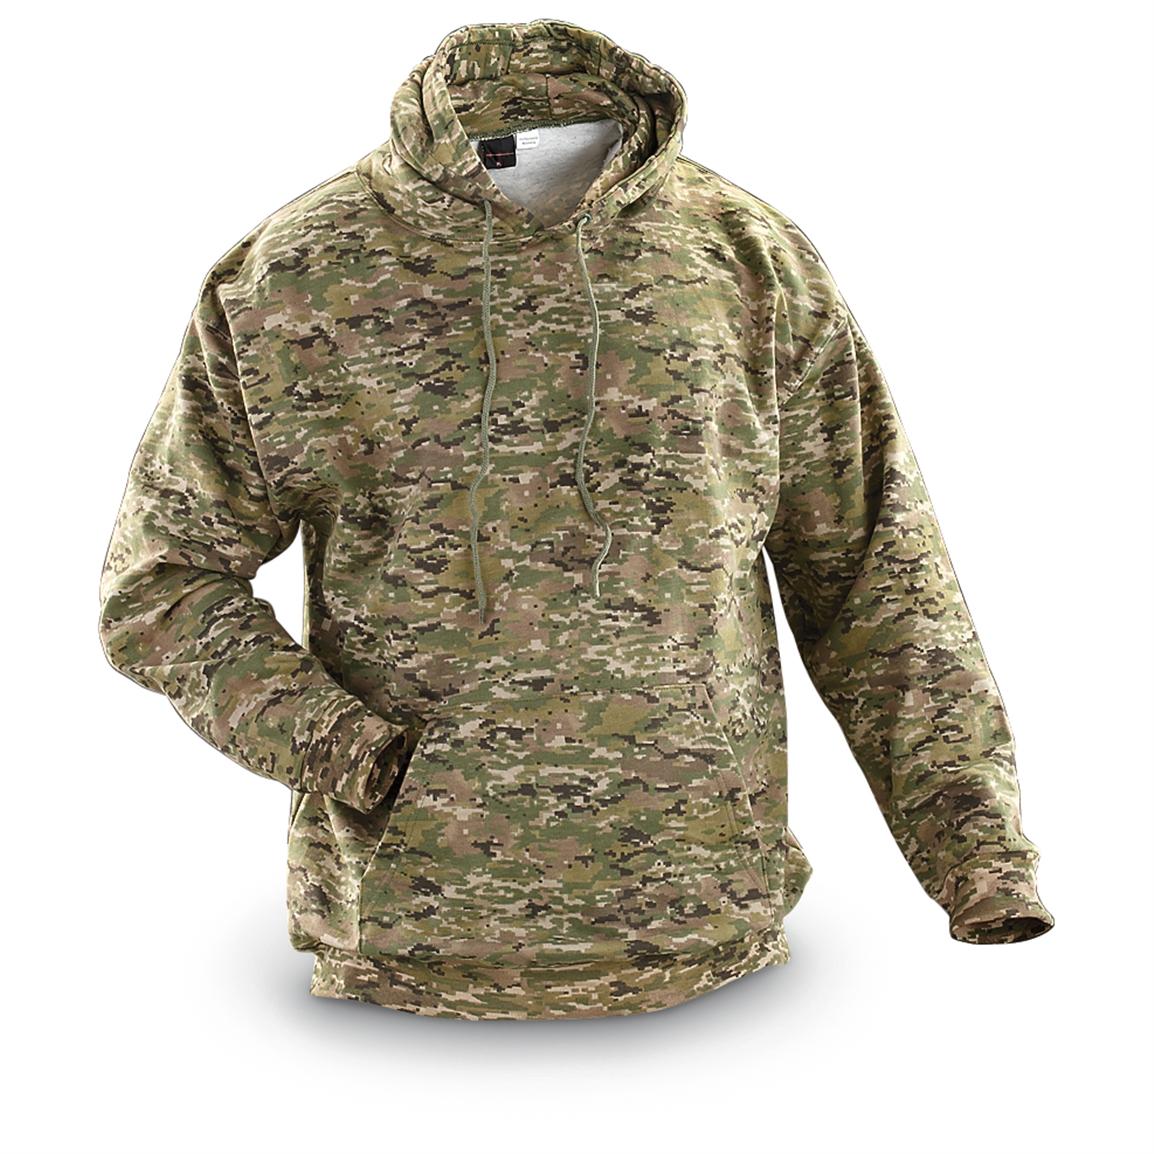 Hoodie Pullover, X - camo - 182608, Tactical Clothing at Sportsman's Guide